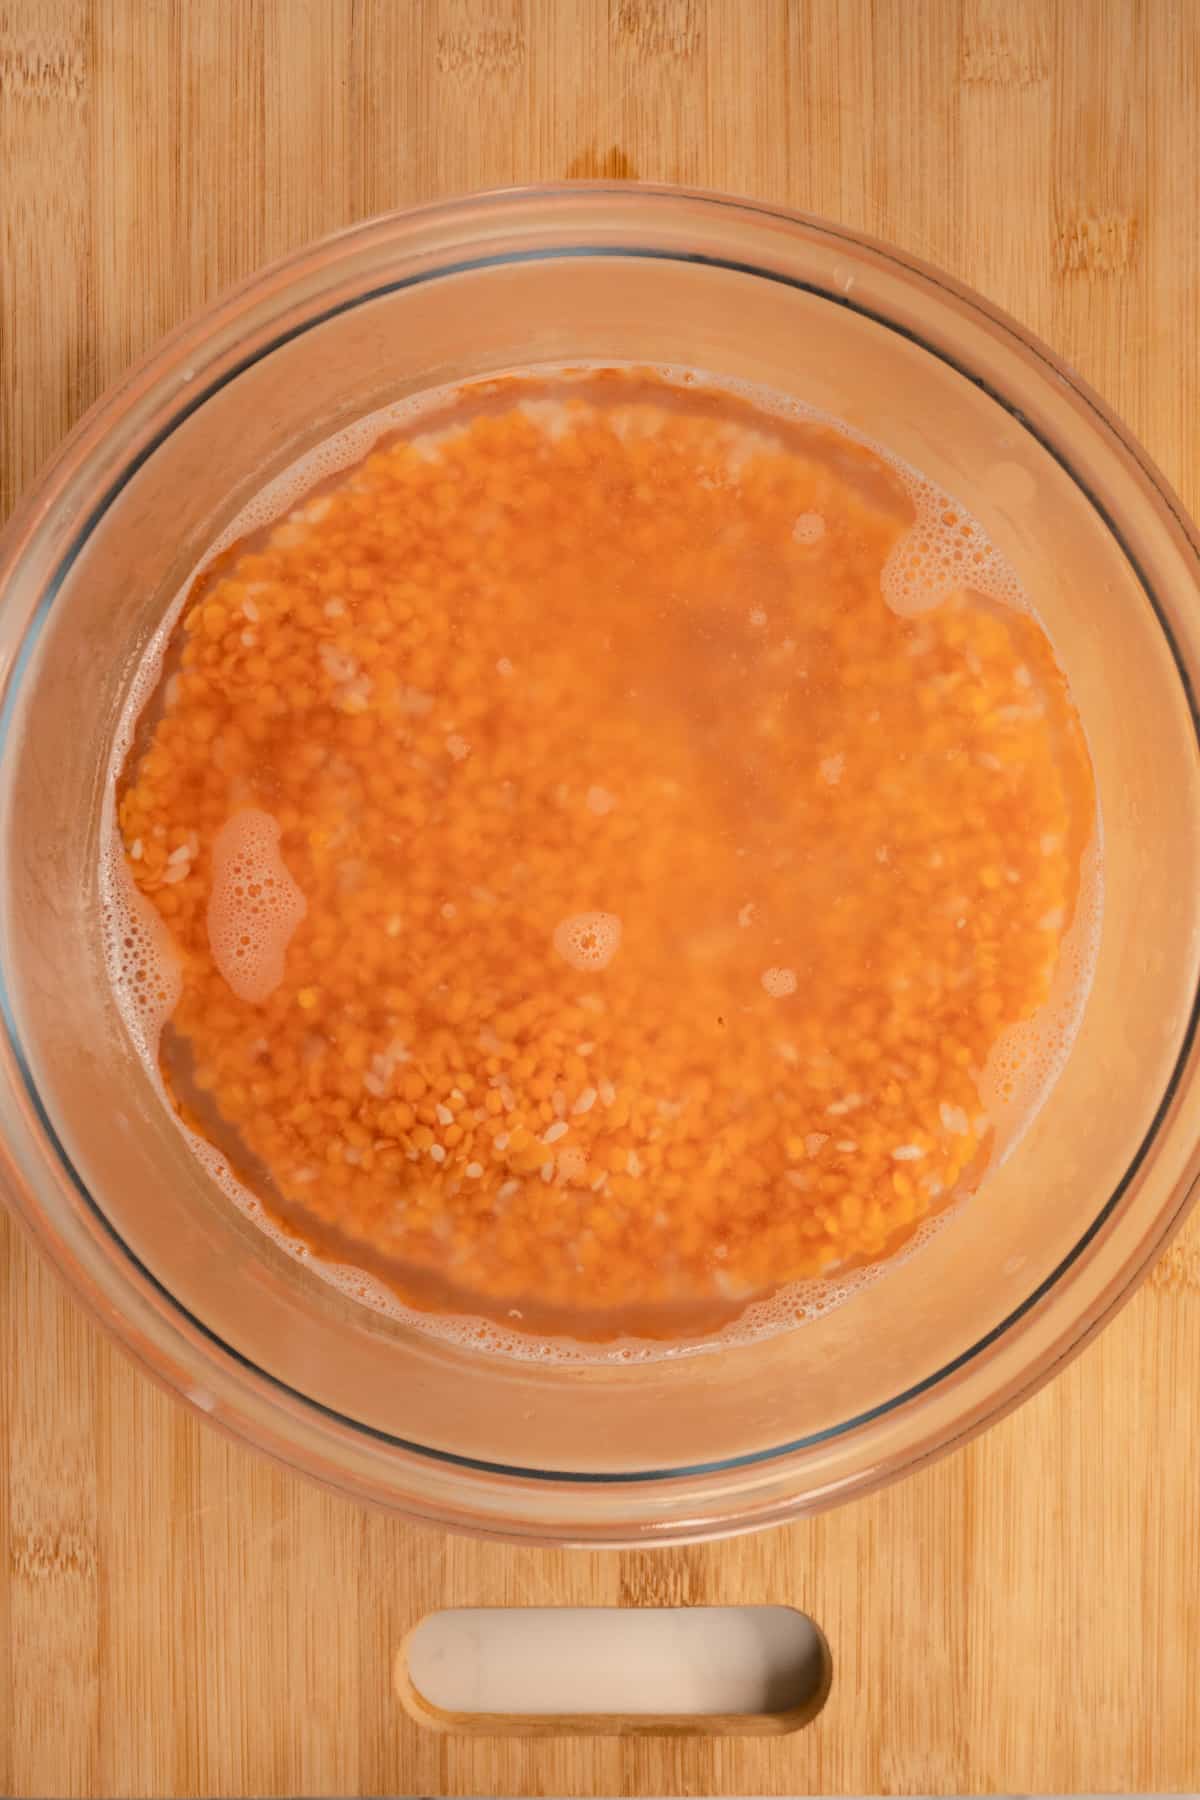 red lentils soaking in water in a glass bowl